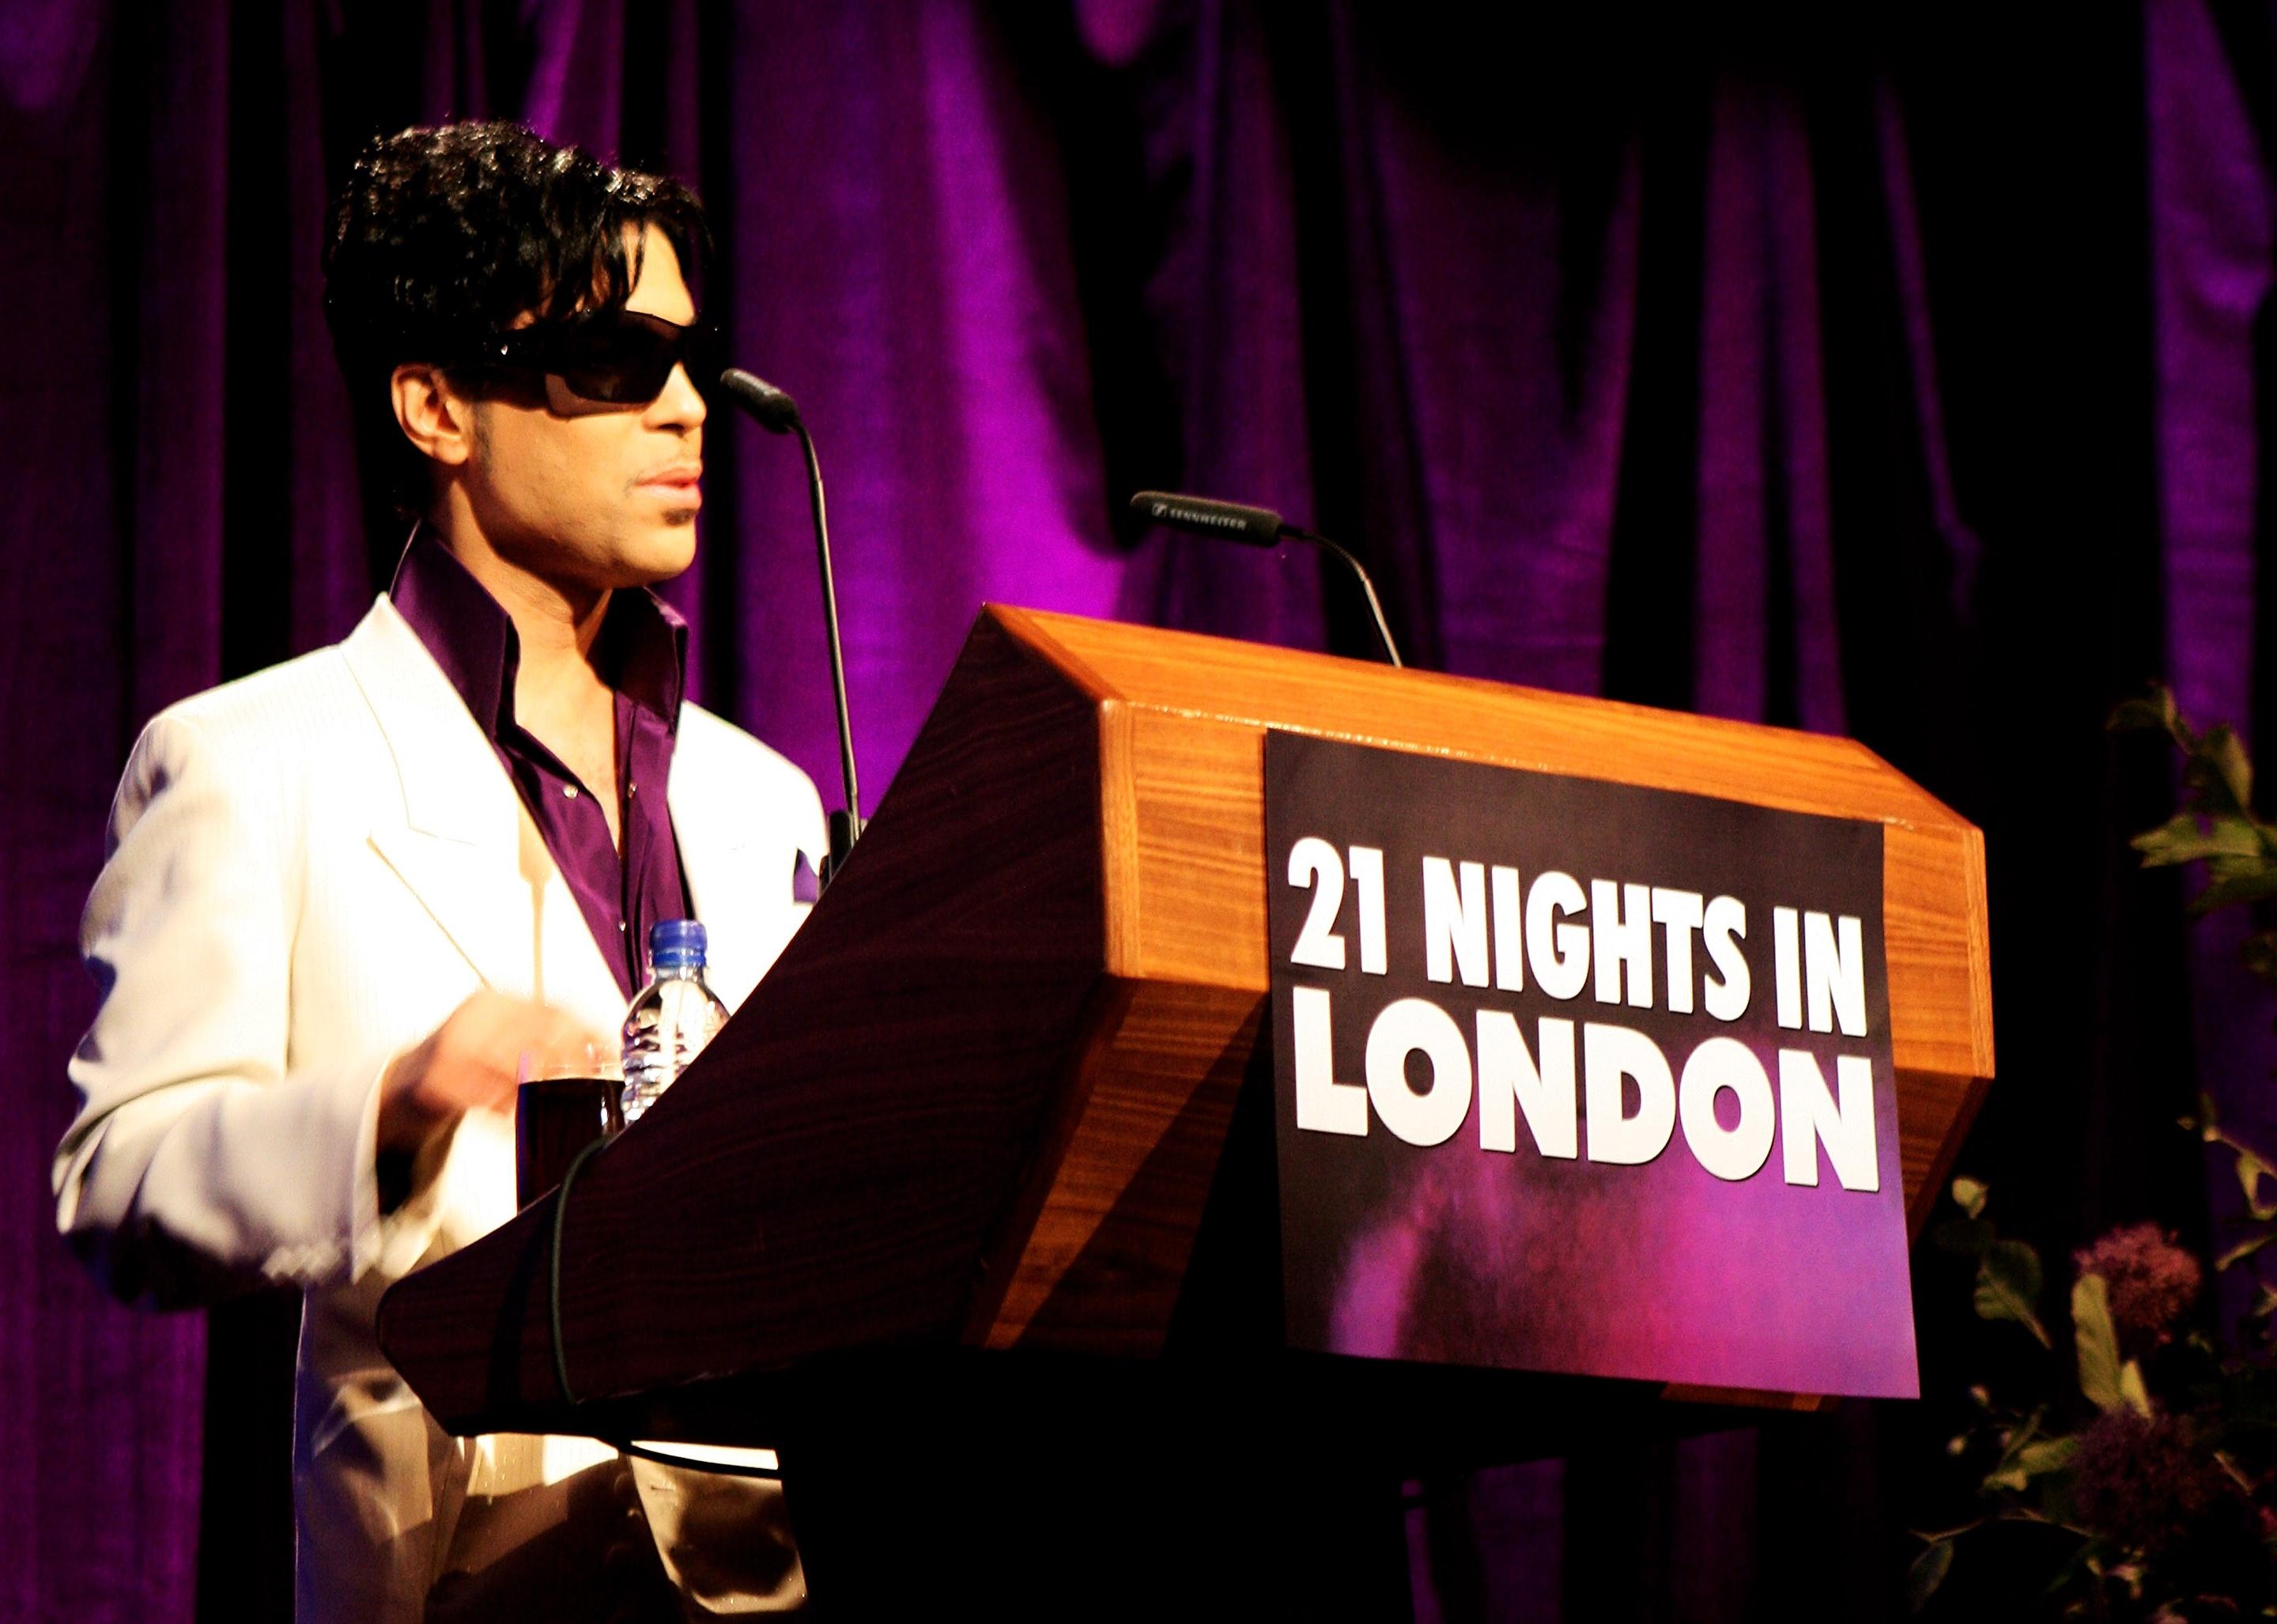 Prince announces his '21 Nights in London' gigs at a press conference.